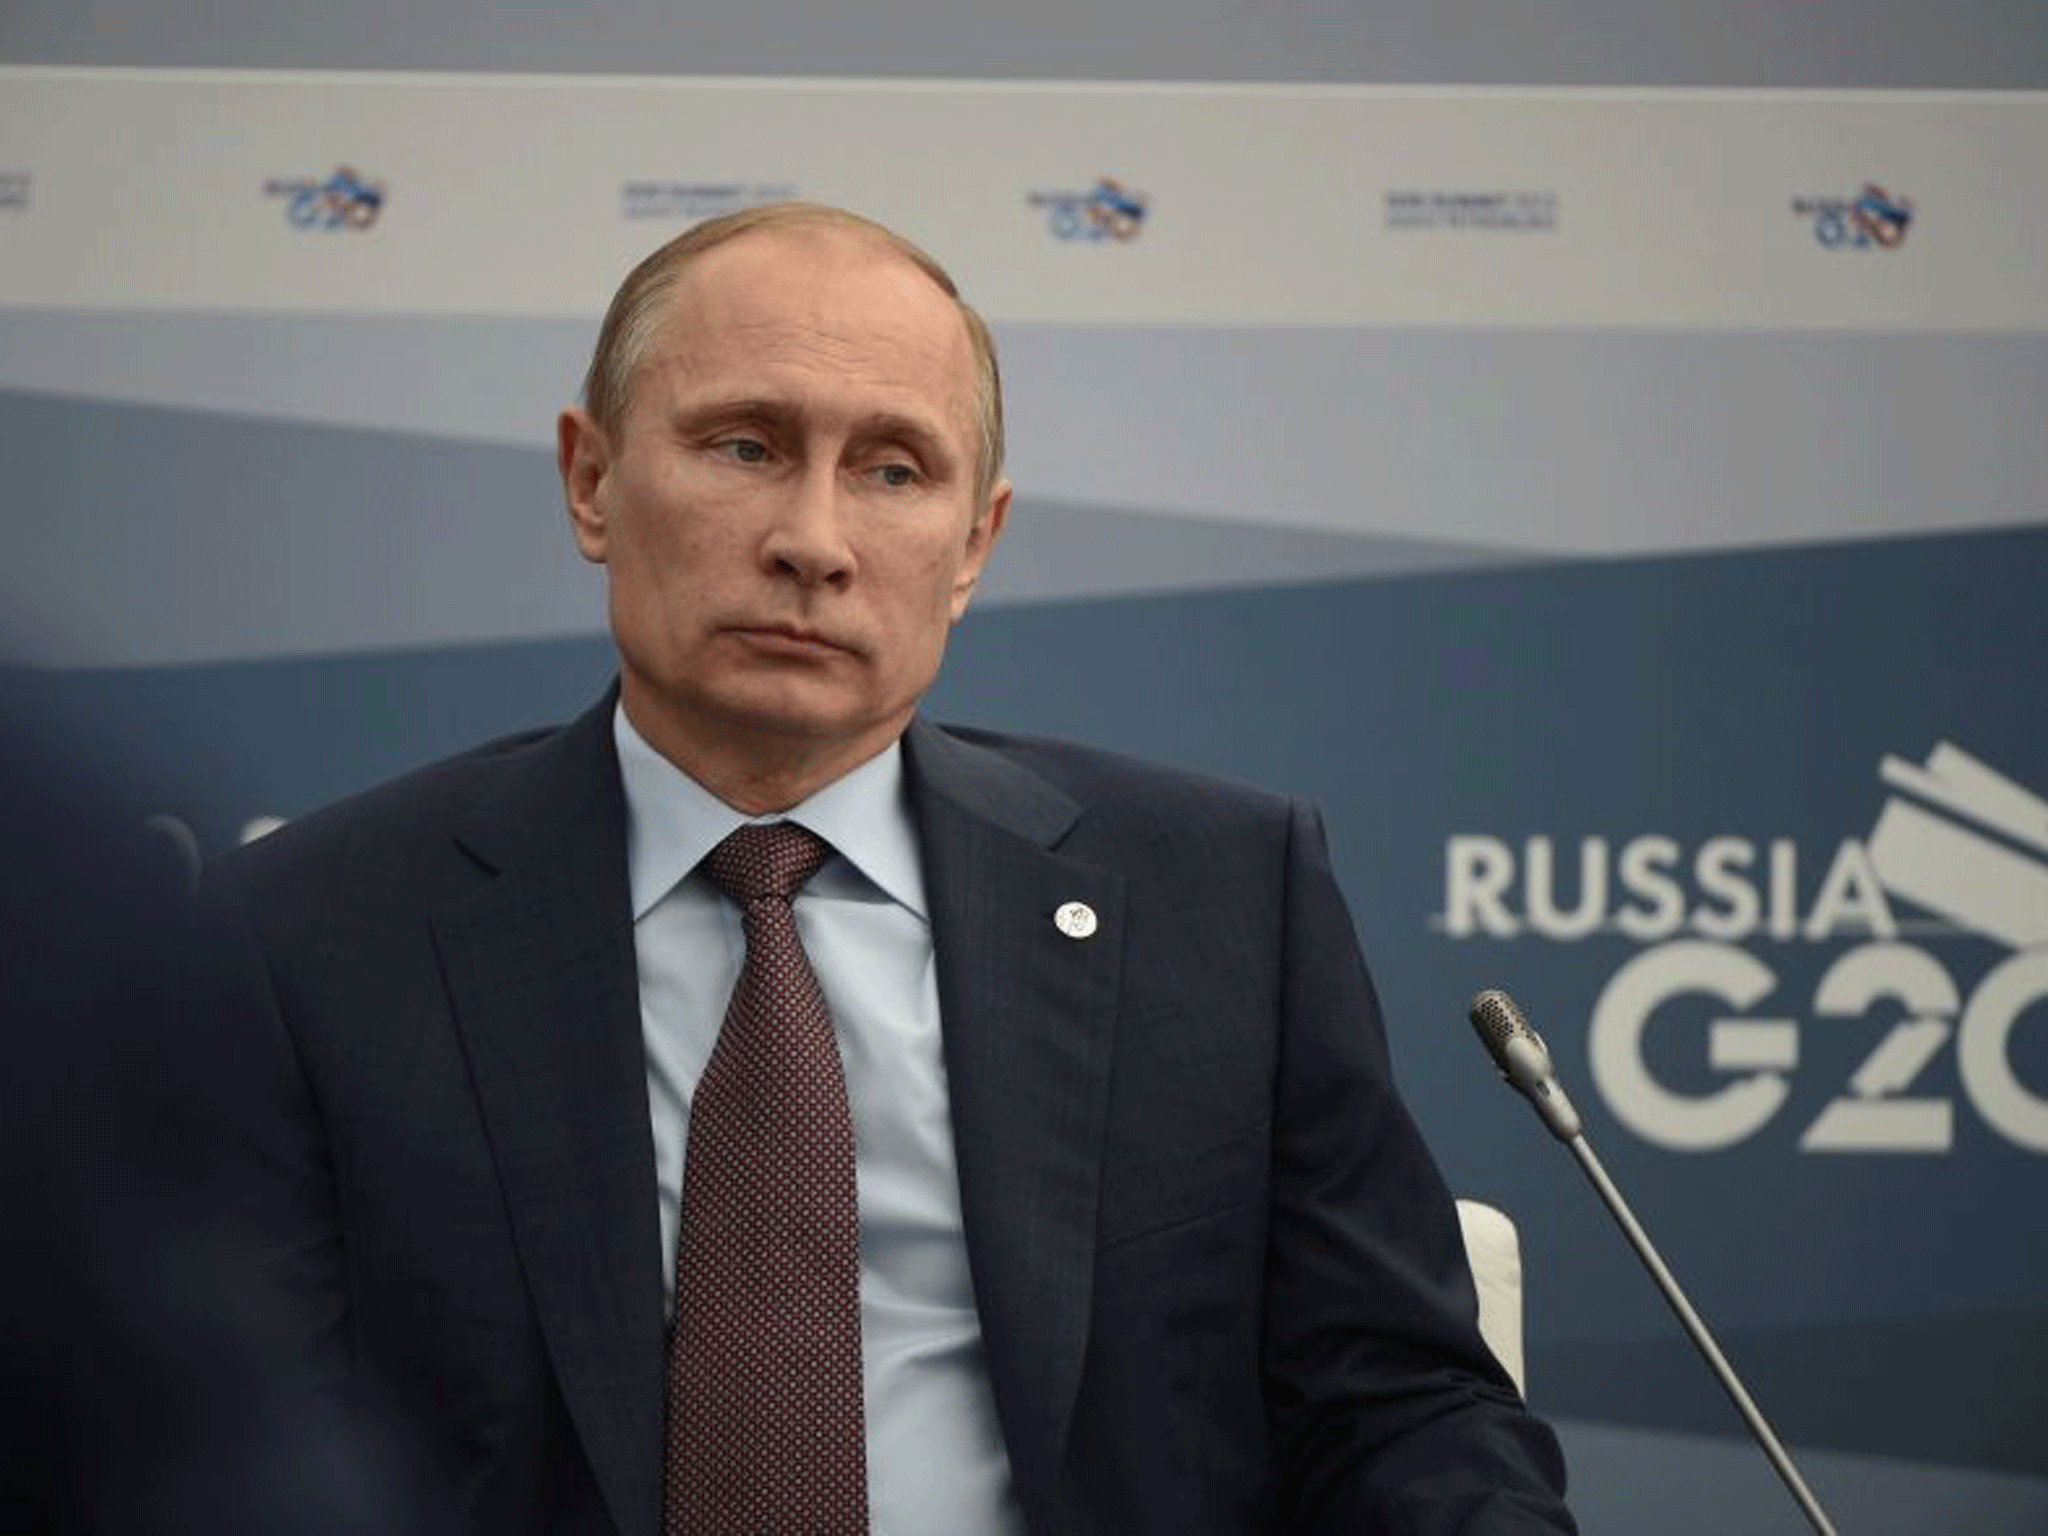 Vladimir Putin has said that Russia will not get militarily involved in Syria